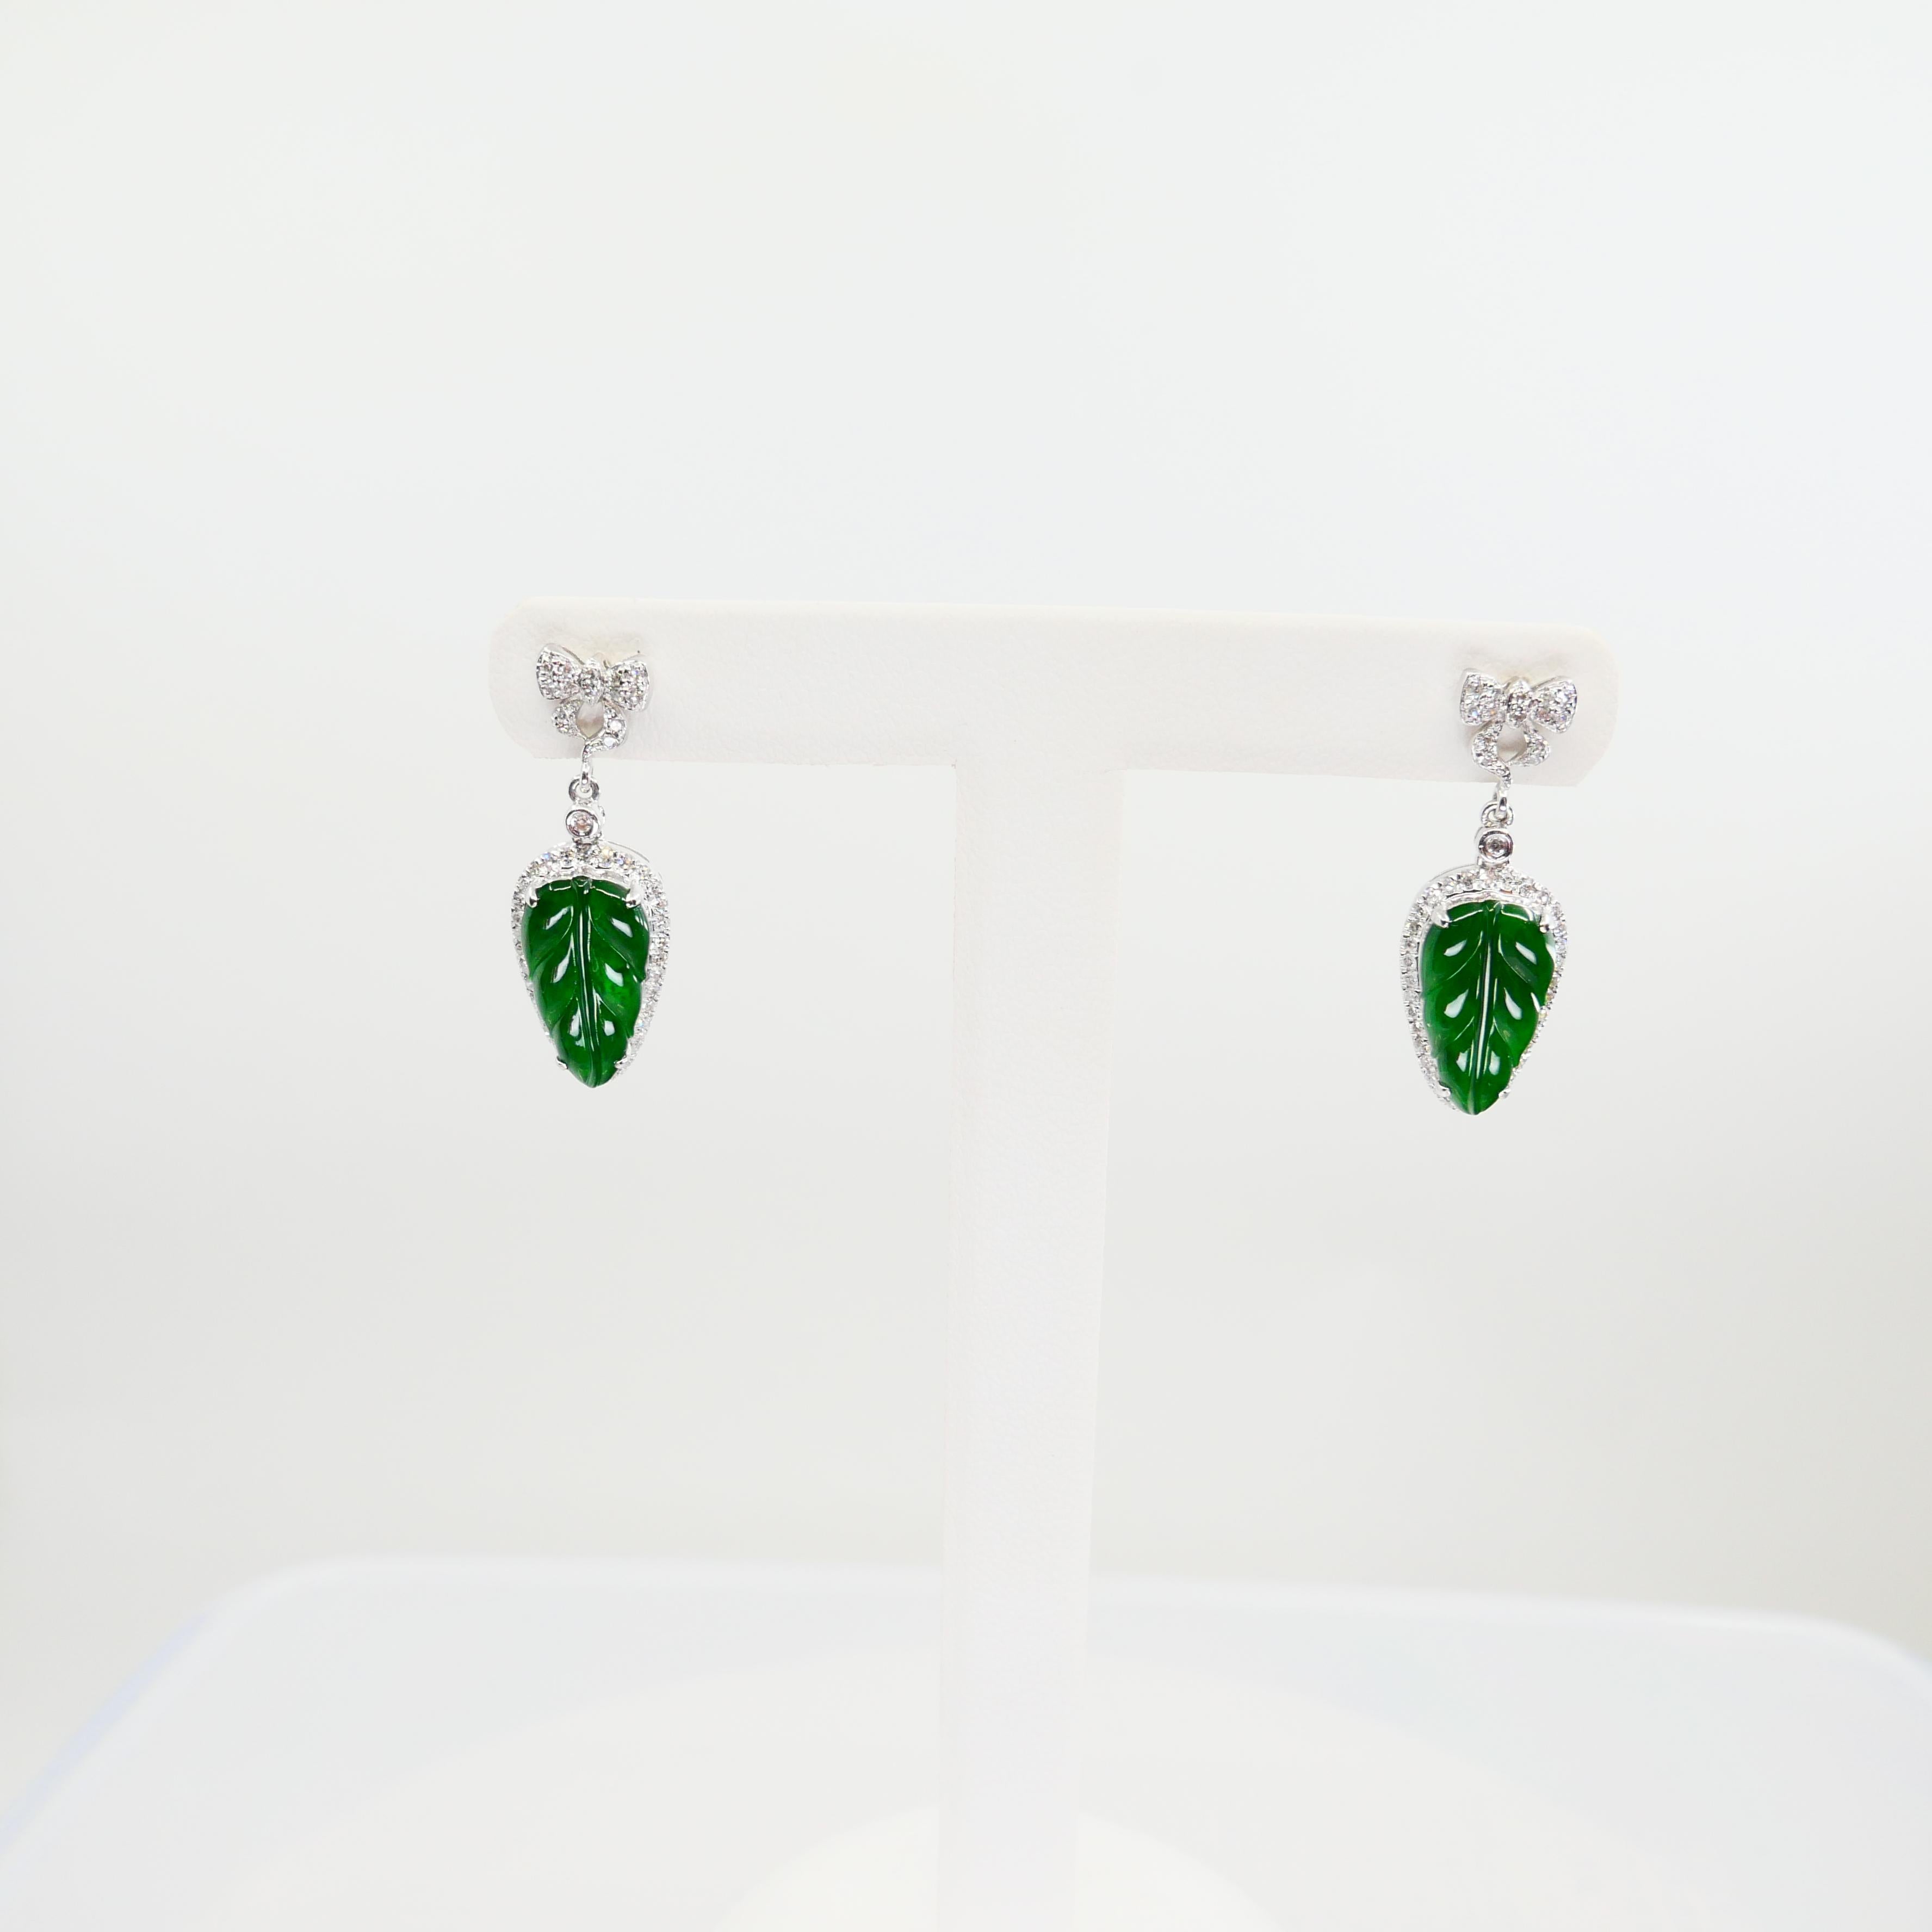 Certified Icy Imperial Green Jade & Diamond Earrings, Collector's Quality For Sale 2